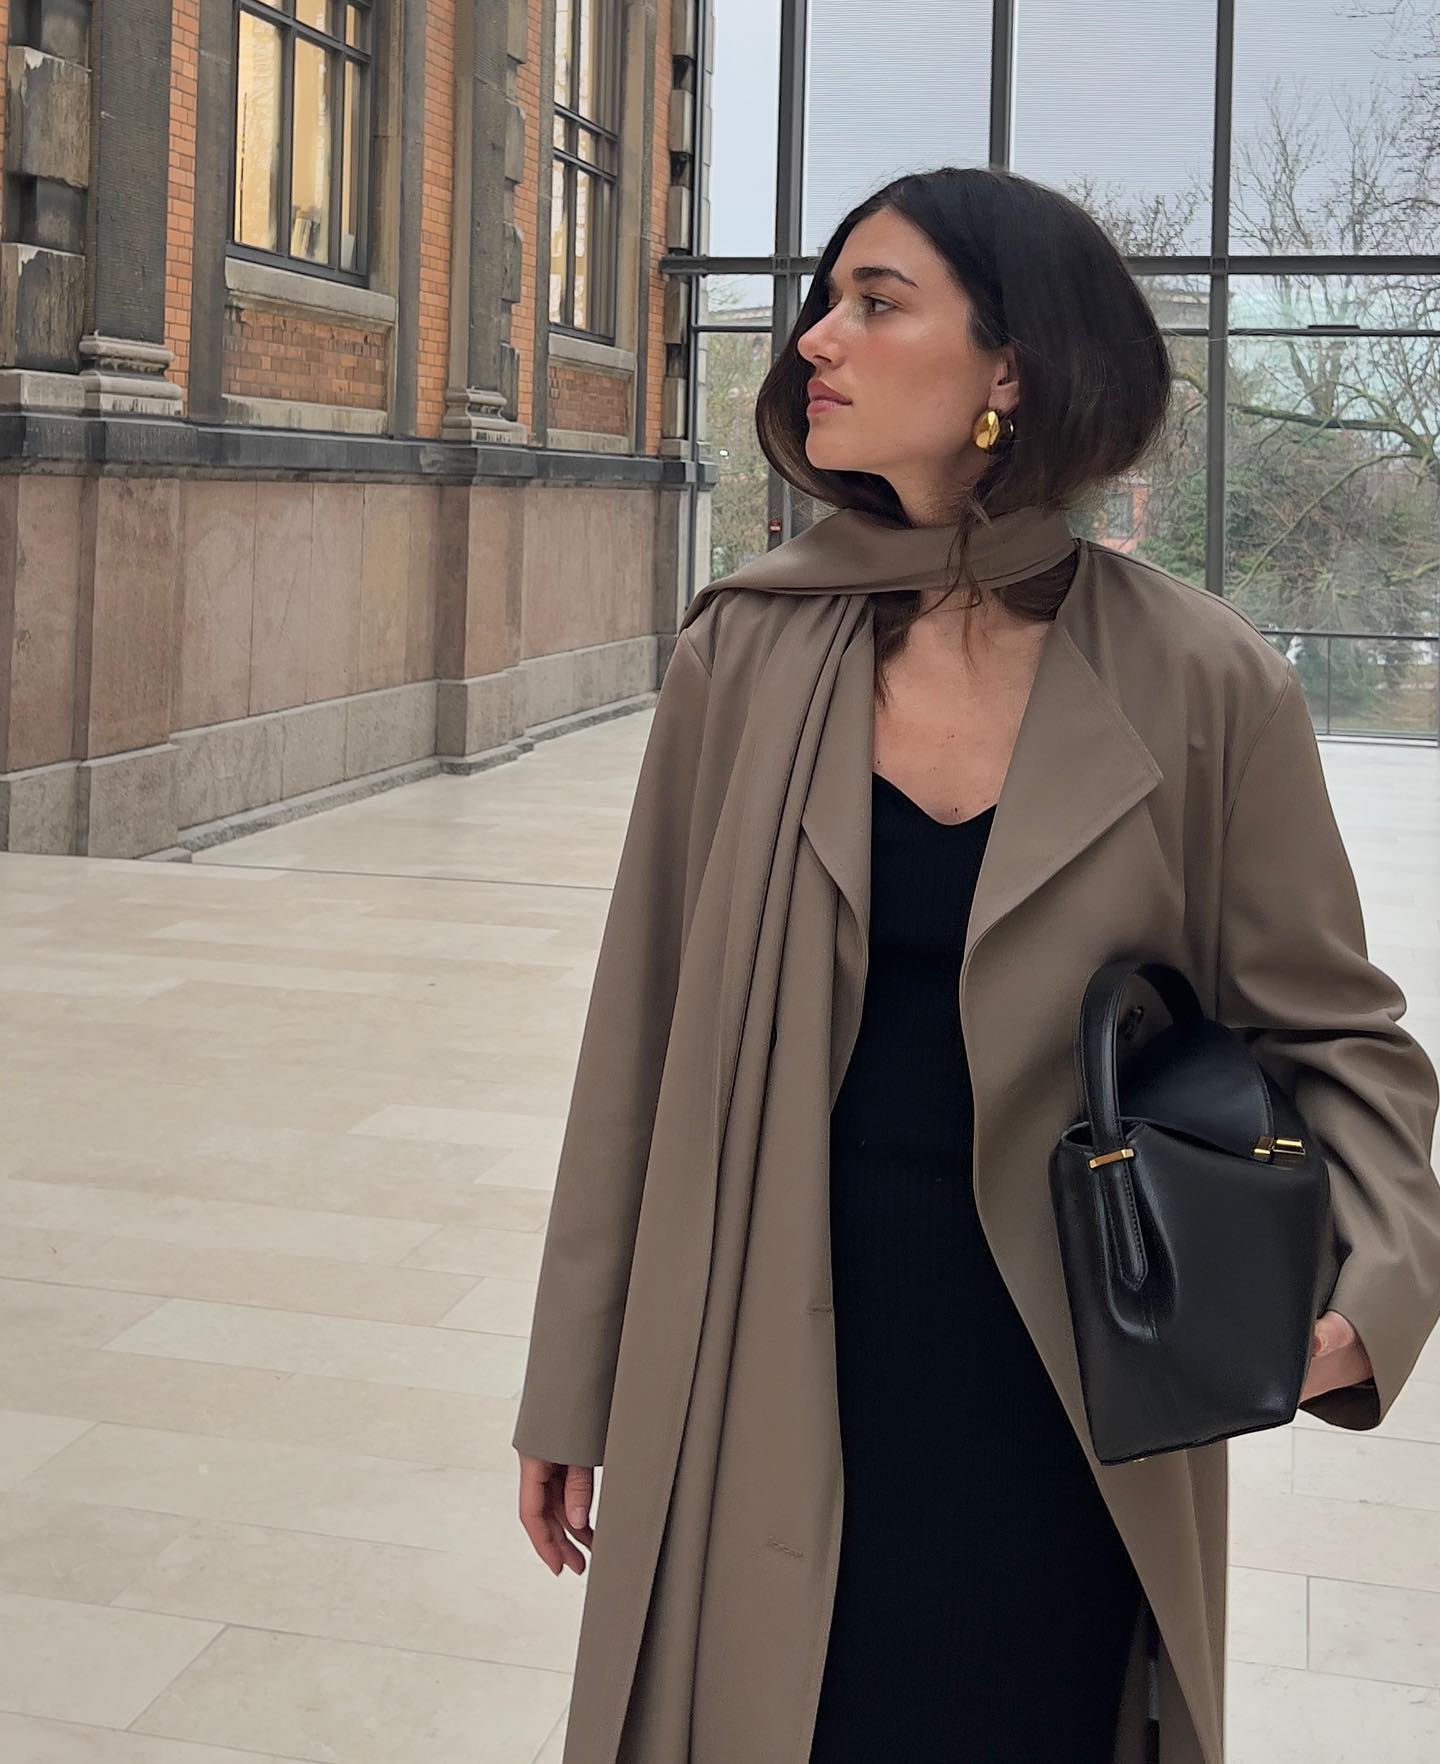 Lida Ilirida Krasniqi 31 Affordable Quiet Luxury Finds for Expensive-Looking Outfits Built In Scarf Trench Coat Gold Earrings Toteme Bag